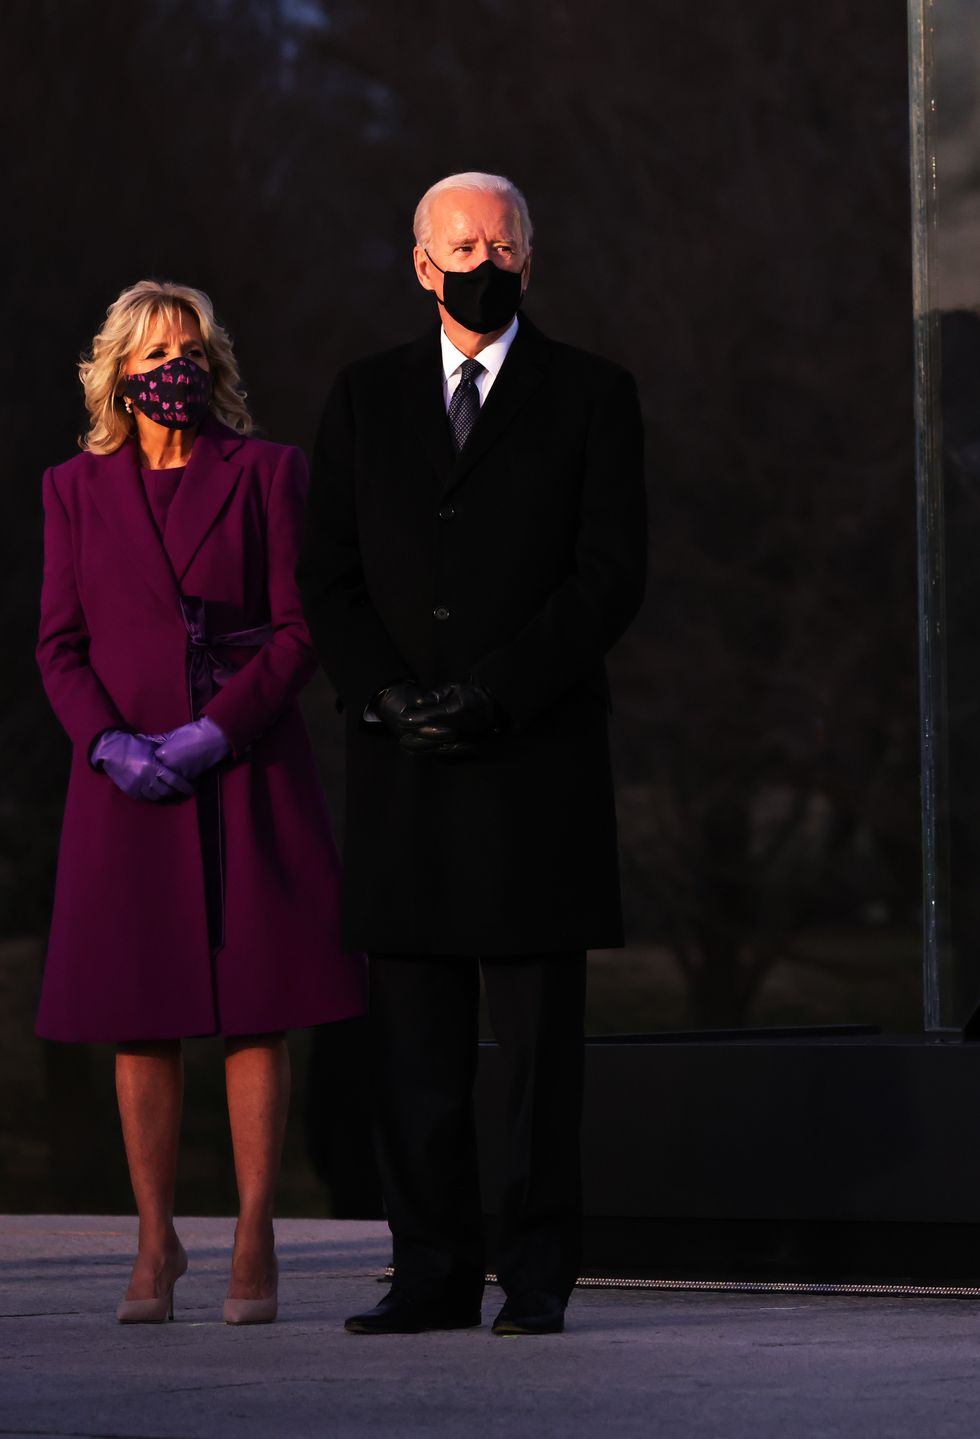 washington, dc   january 19 dr jill biden and president elect joe biden listen to a song at a memorial for victims of the coronavirus covid 19 pandemic at the lincoln memorial on the eve of the presidential inauguration on january 19, 2021 in washington, dc there have been nearly 400,00 deaths in the us since the first confirmed case of the virus in seattle in january of 2020 photo by michael m santiagogetty images